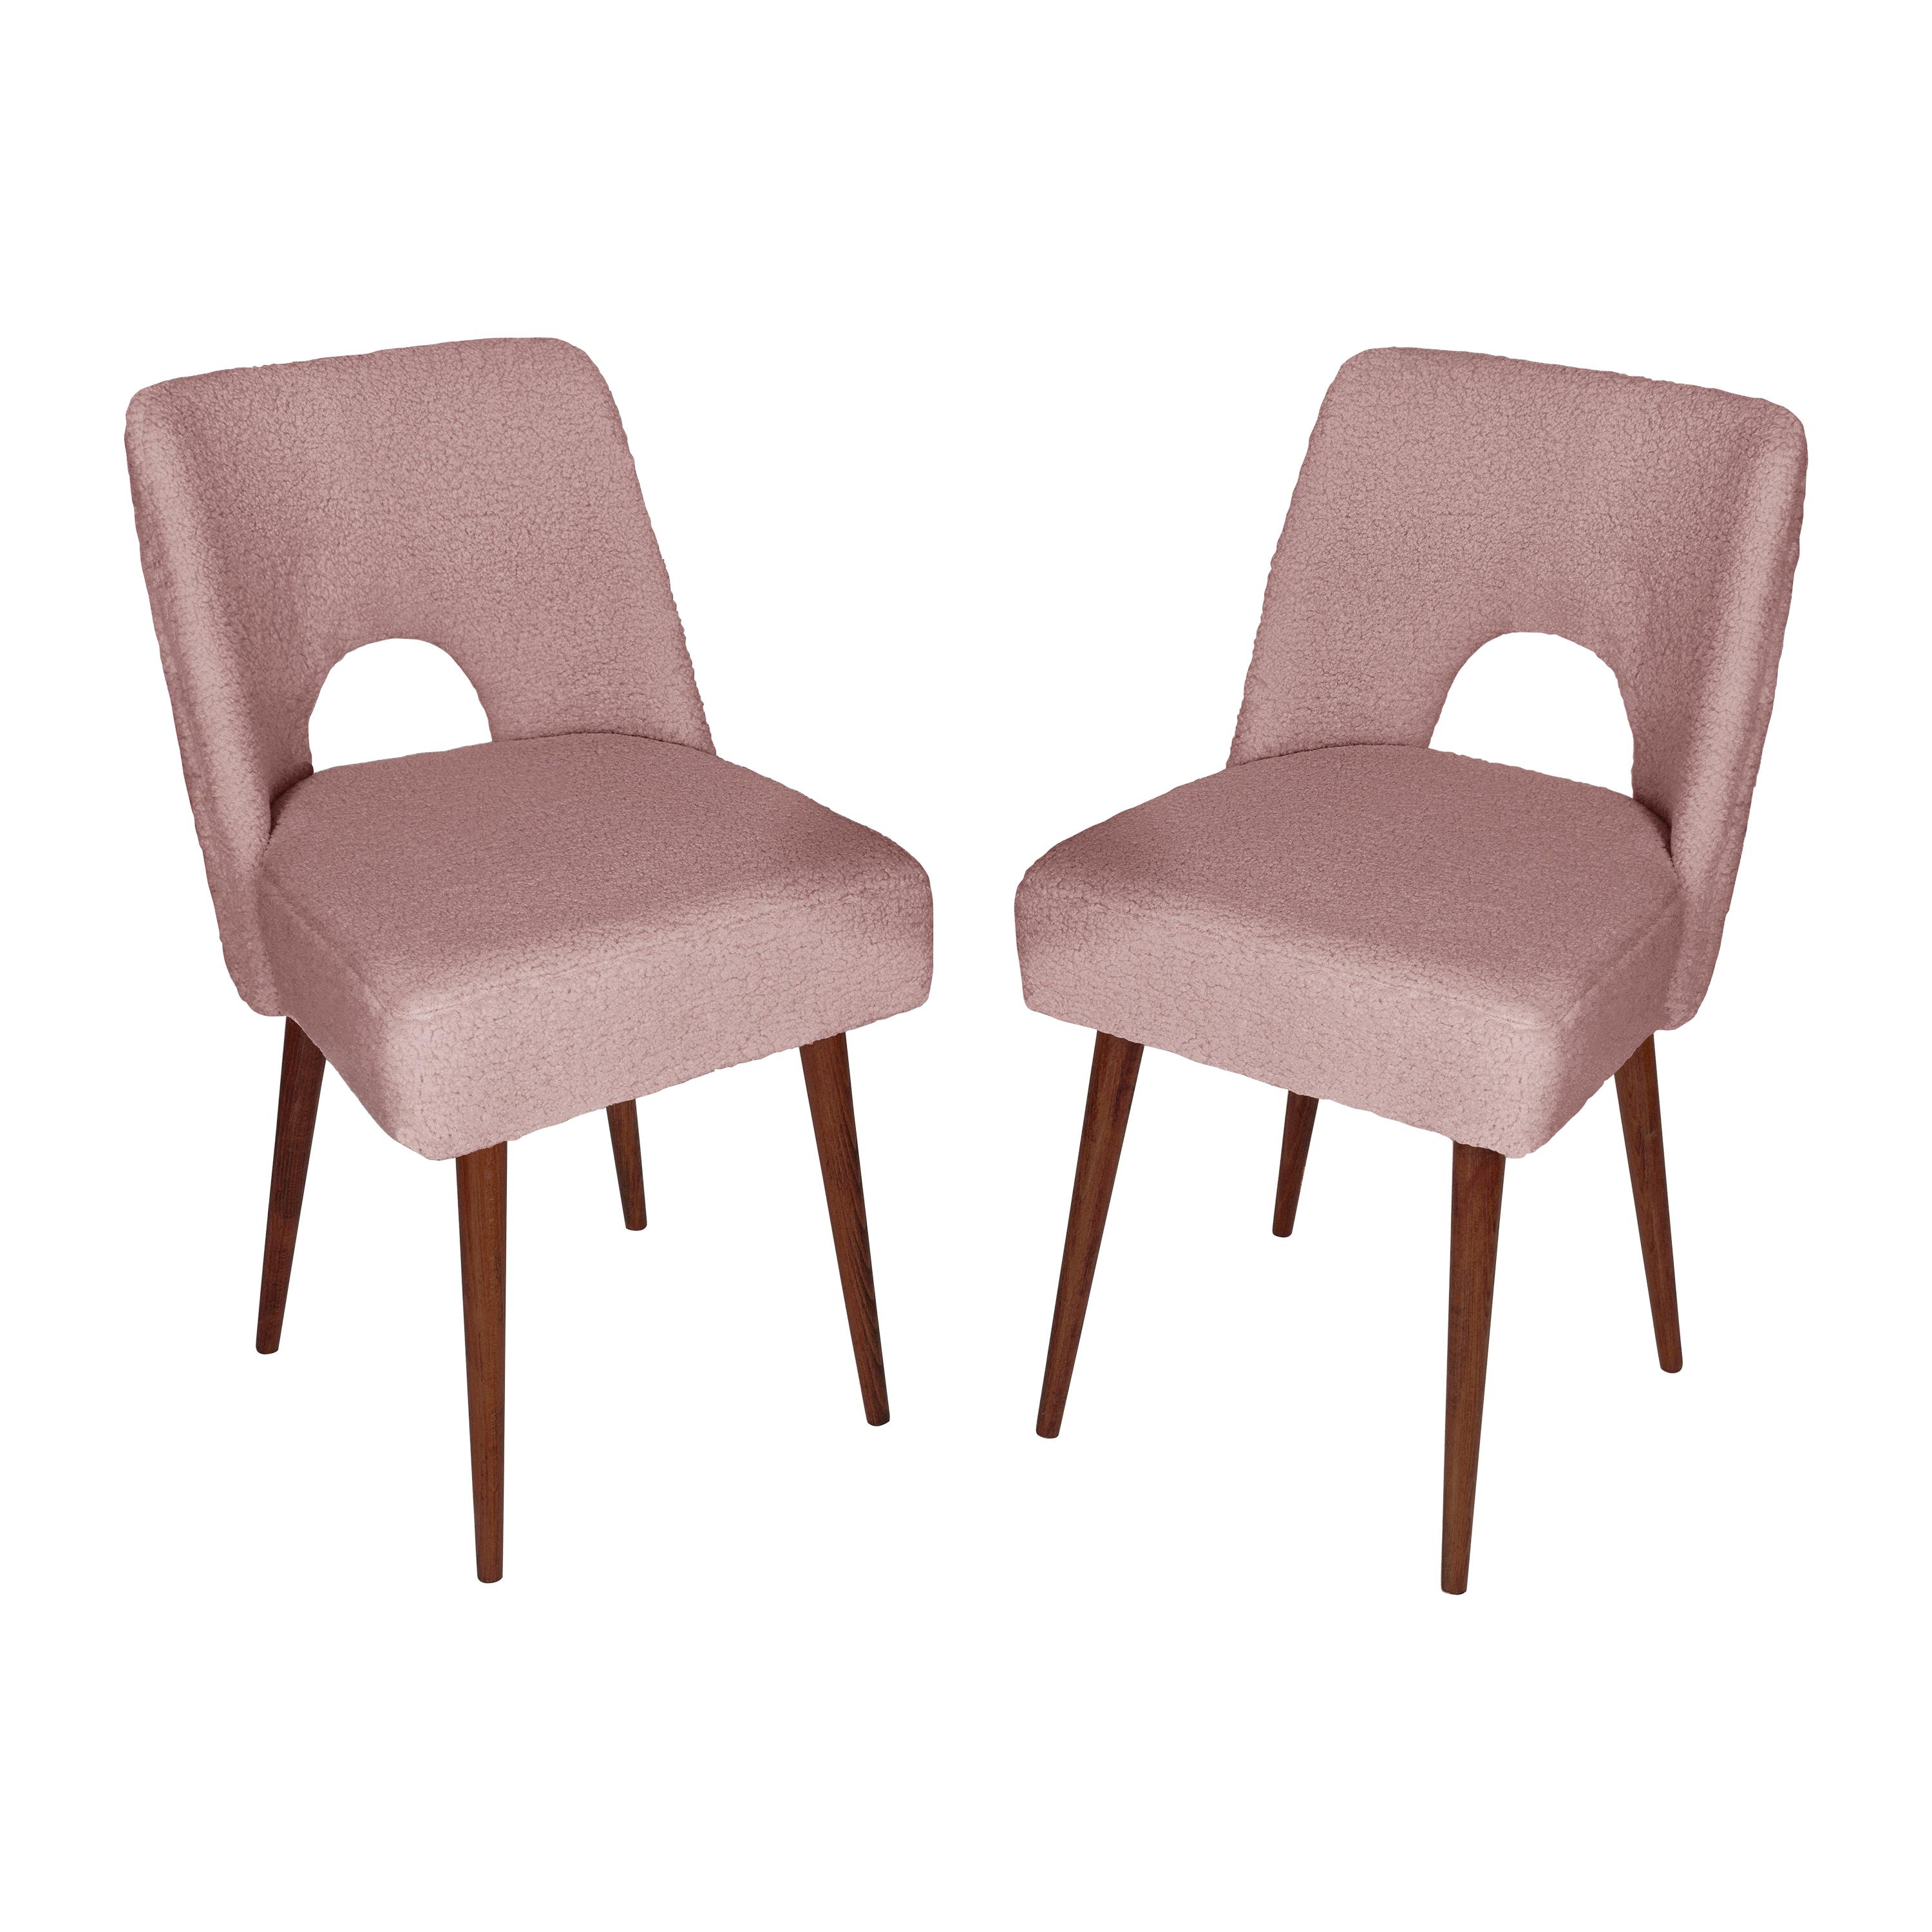 Set of Two Pink Boucle 'Shell' Chairs, 1960s For Sale